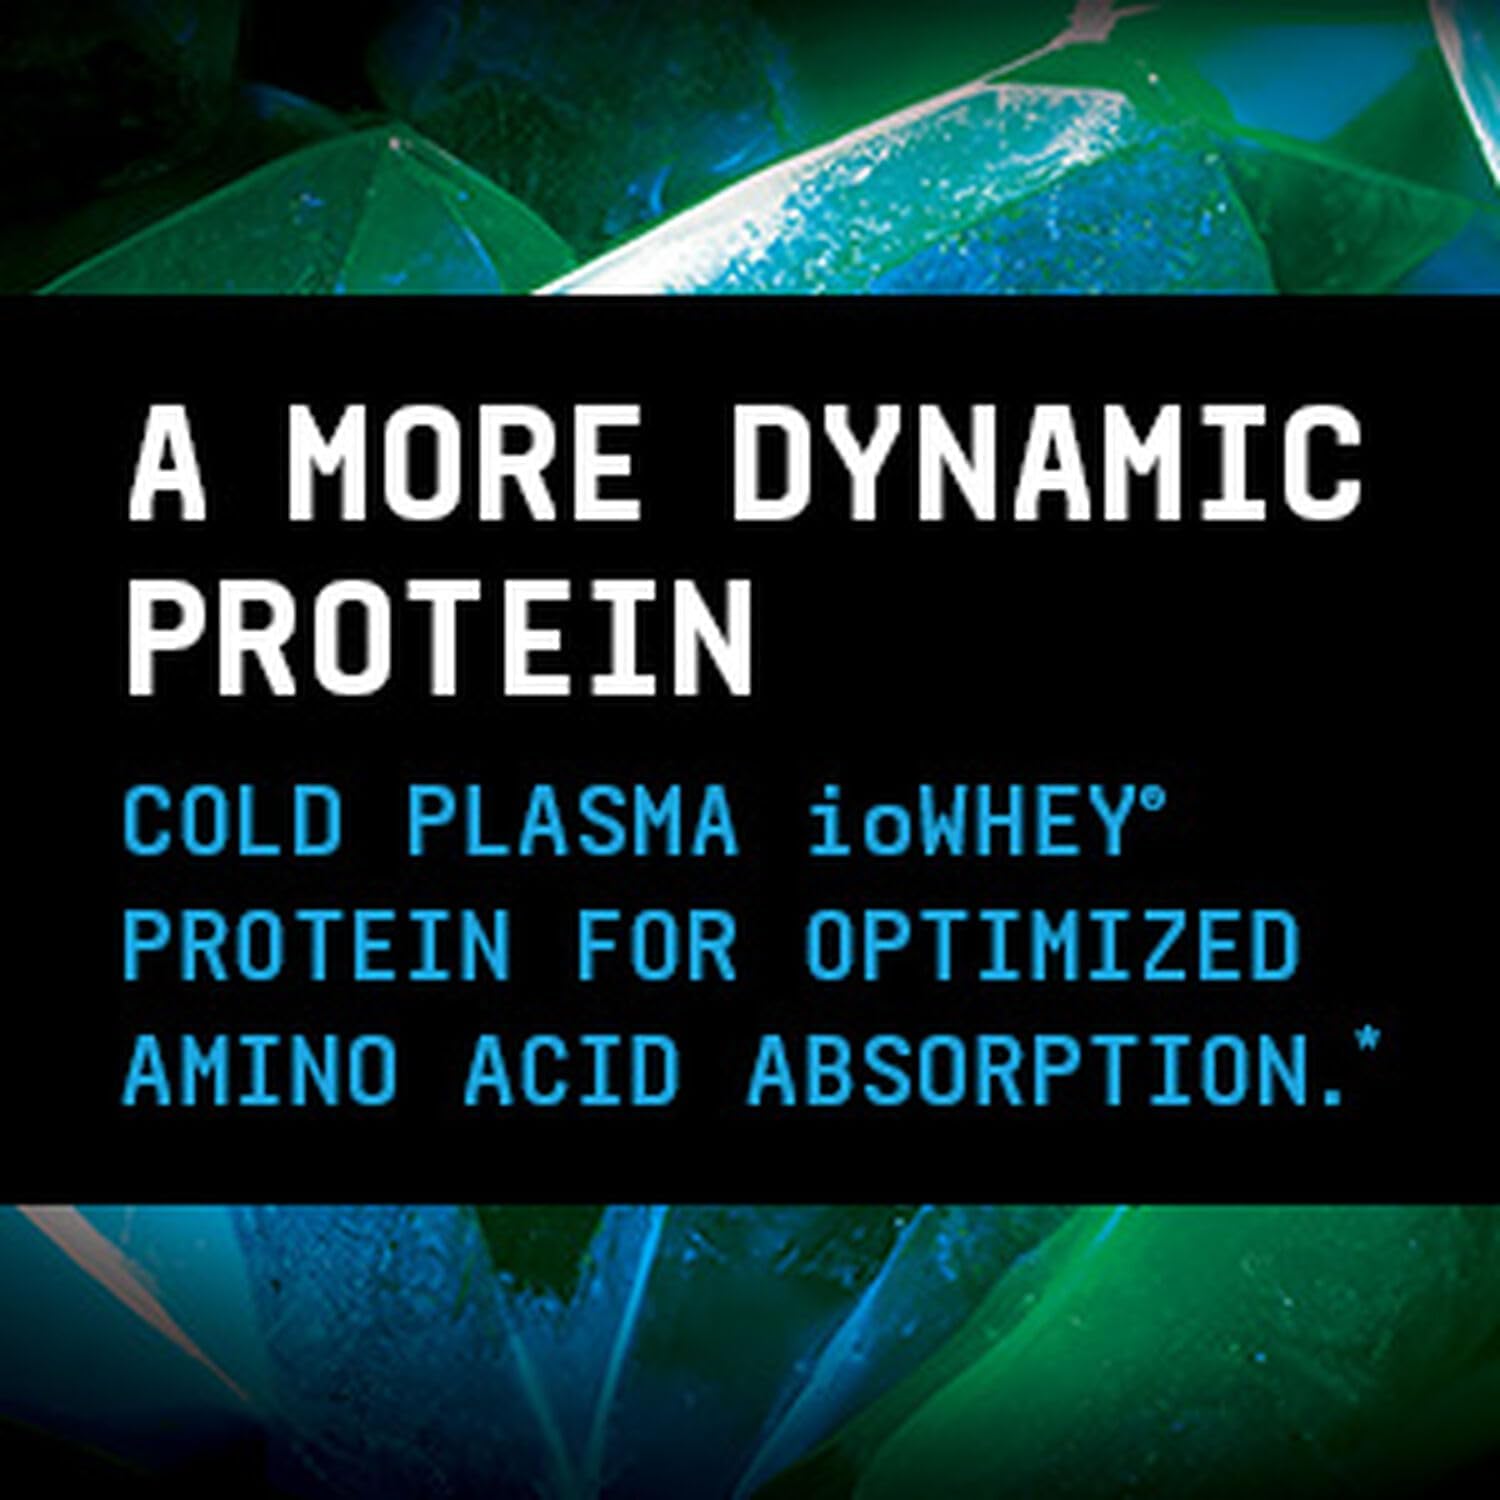 BEYOND RAW Dynamic Whey | High-Tech Protein | Optimized Absorption and